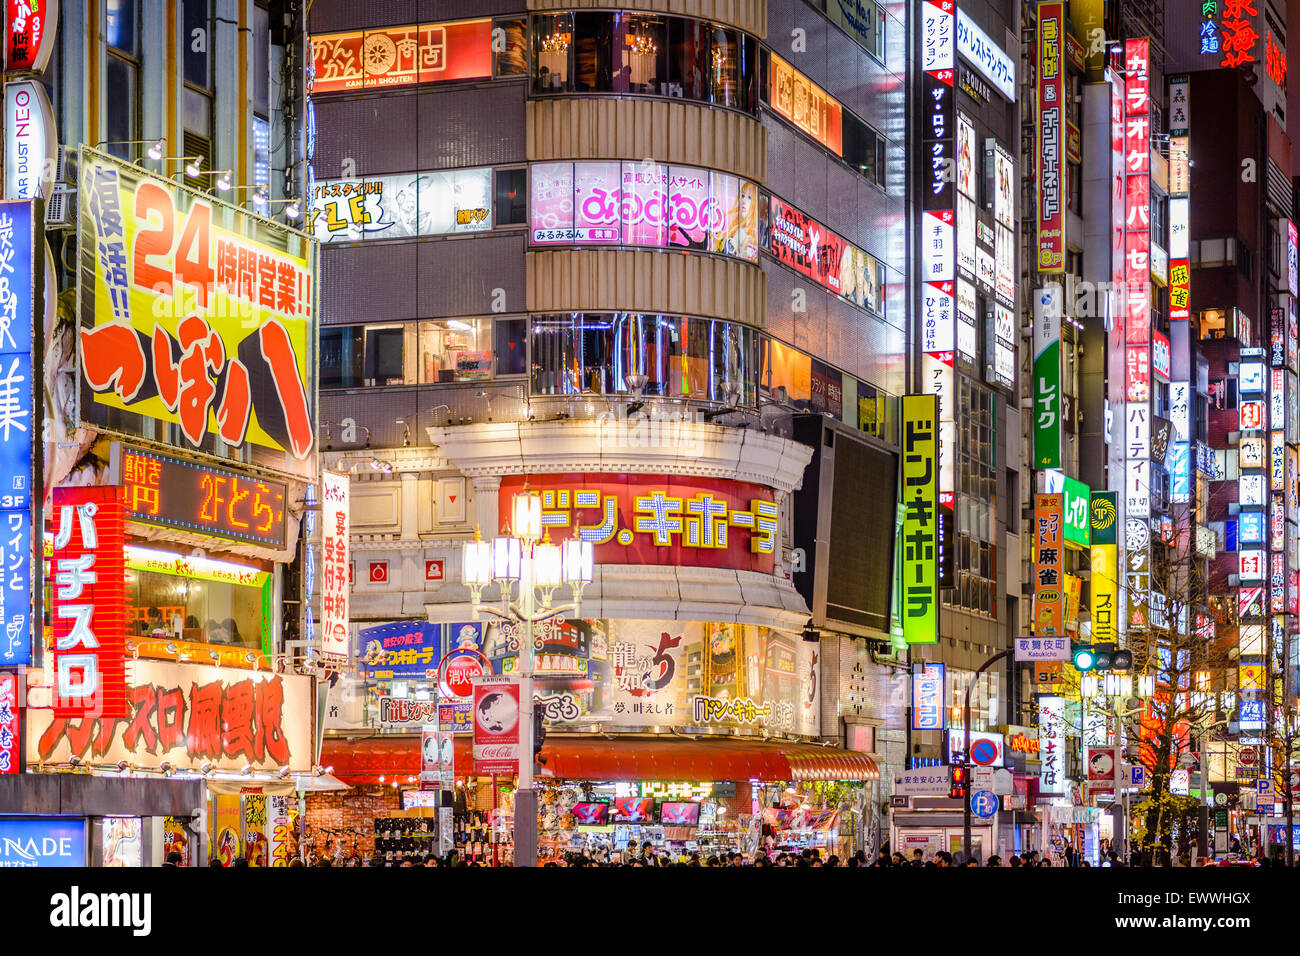 Billboards in Shinjuku's Kabuki-cho district. The area is a nightlife district known as Sleepless Town. Stock Photo